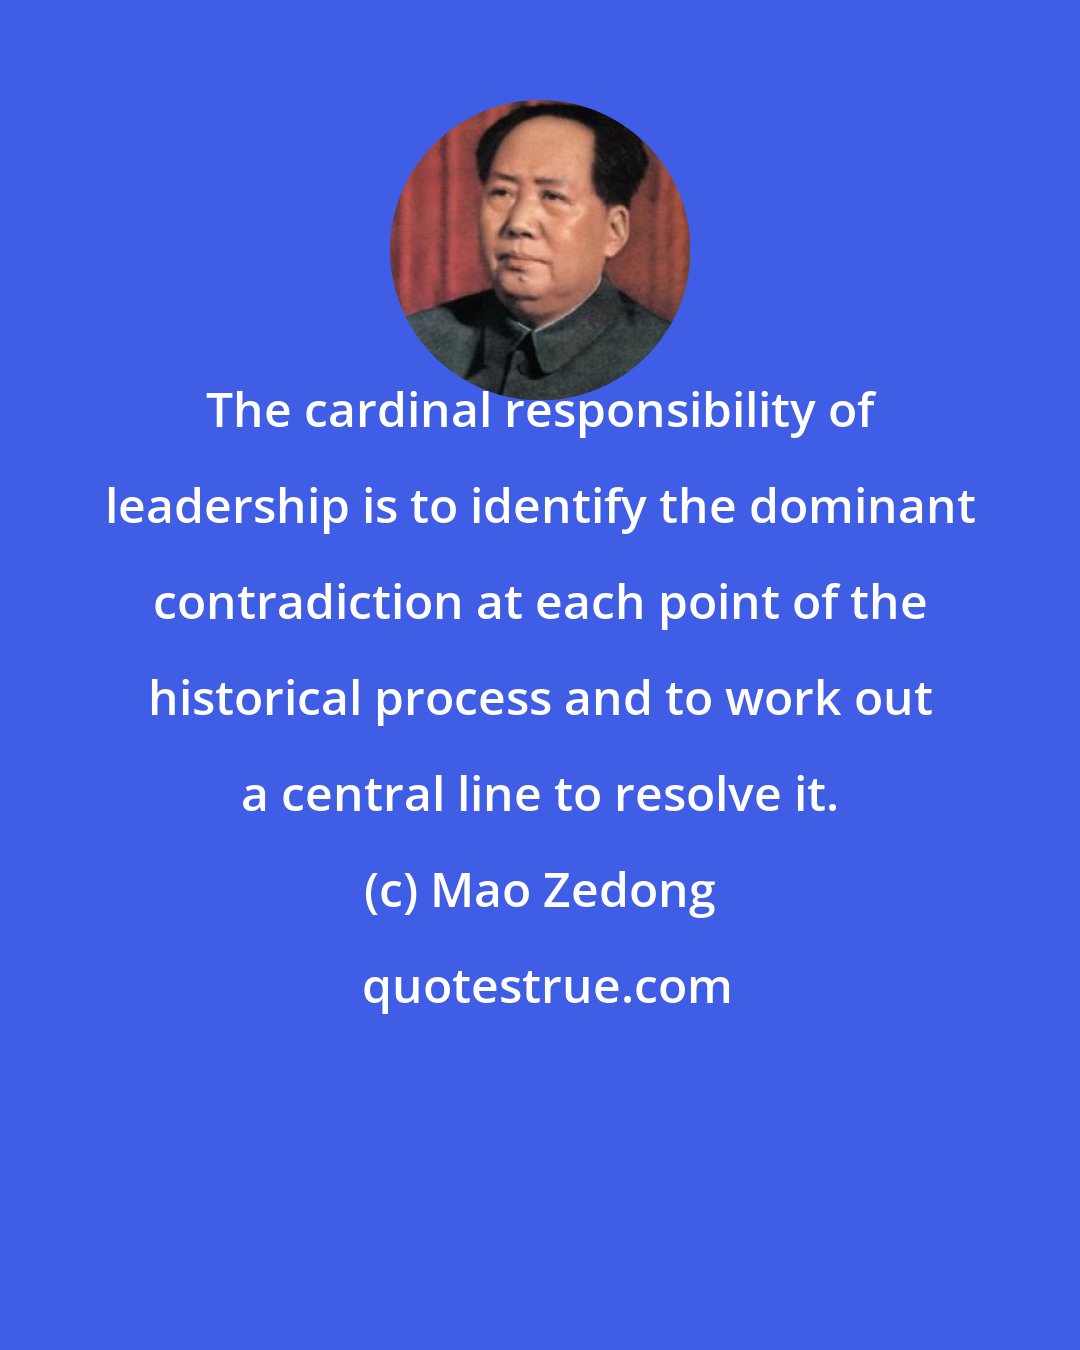 Mao Zedong: The cardinal responsibility of leadership is to identify the dominant contradiction at each point of the historical process and to work out a central line to resolve it.